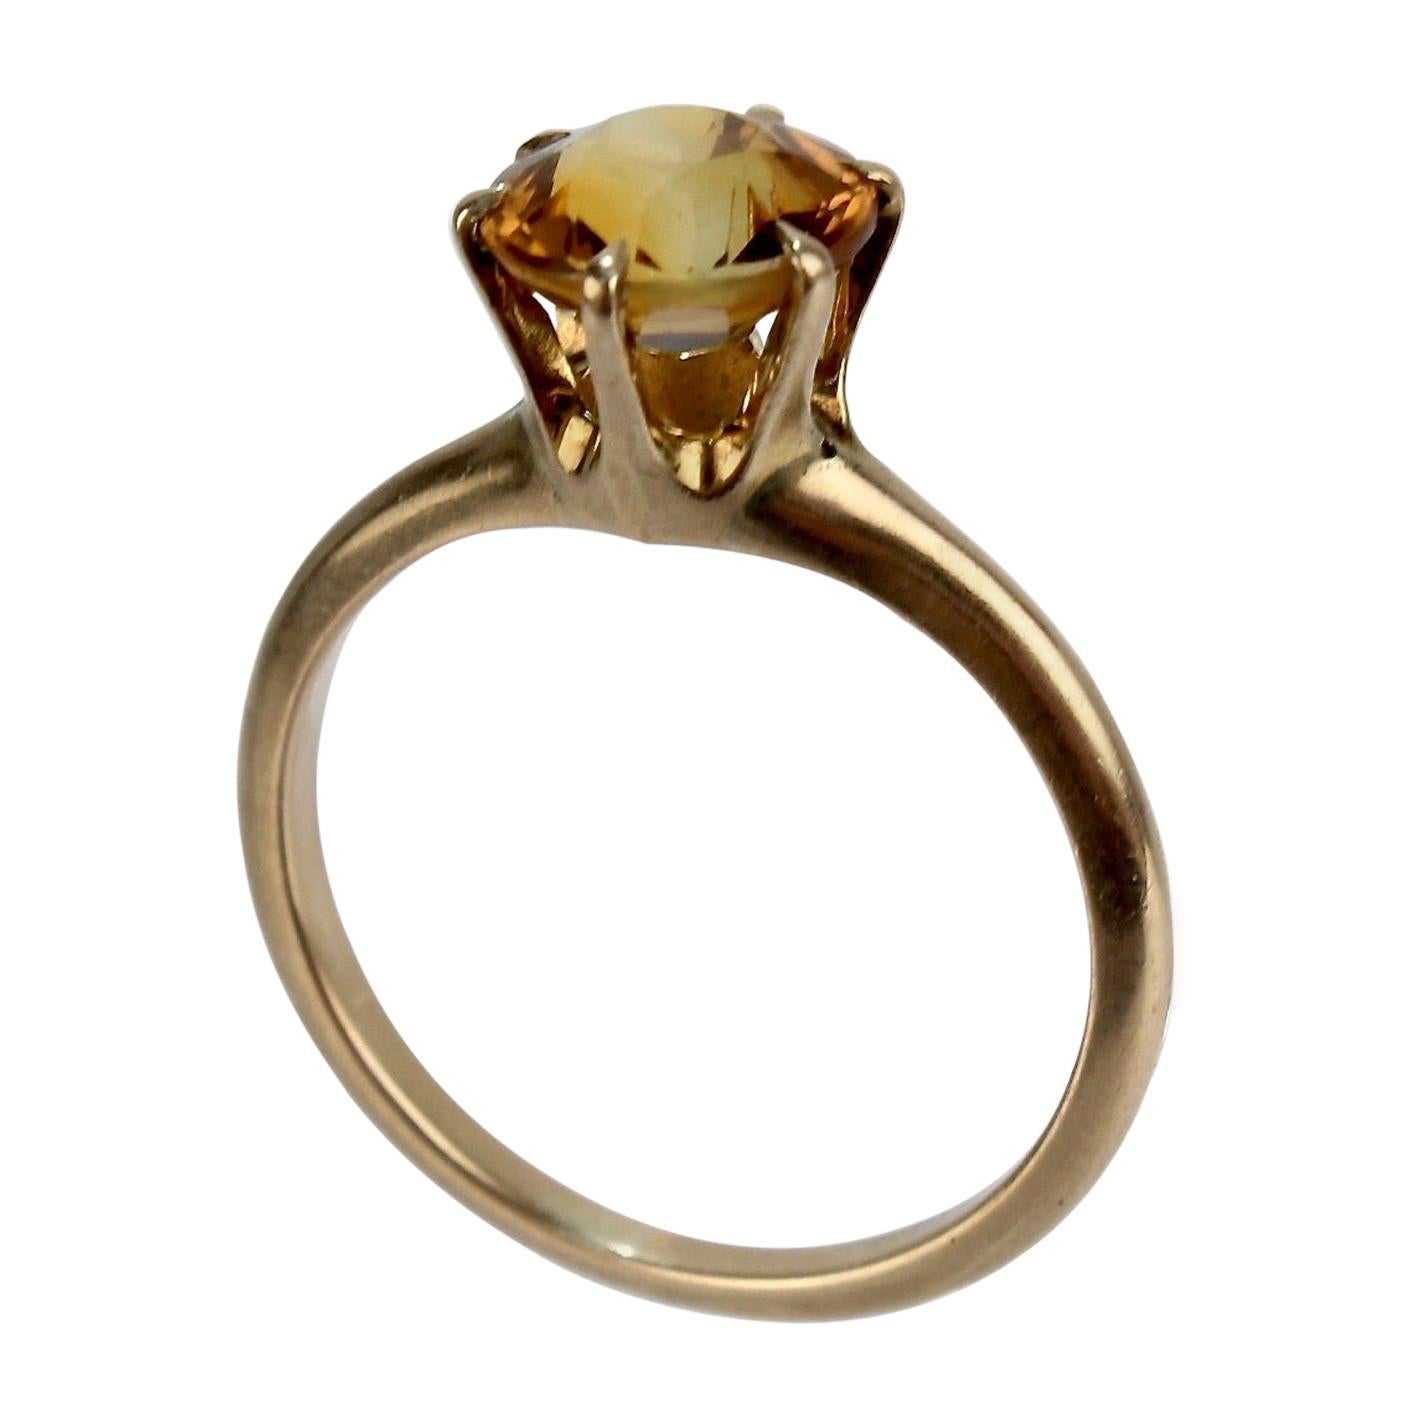 Vintage Gold and Orange Citrine Solitaire Ring